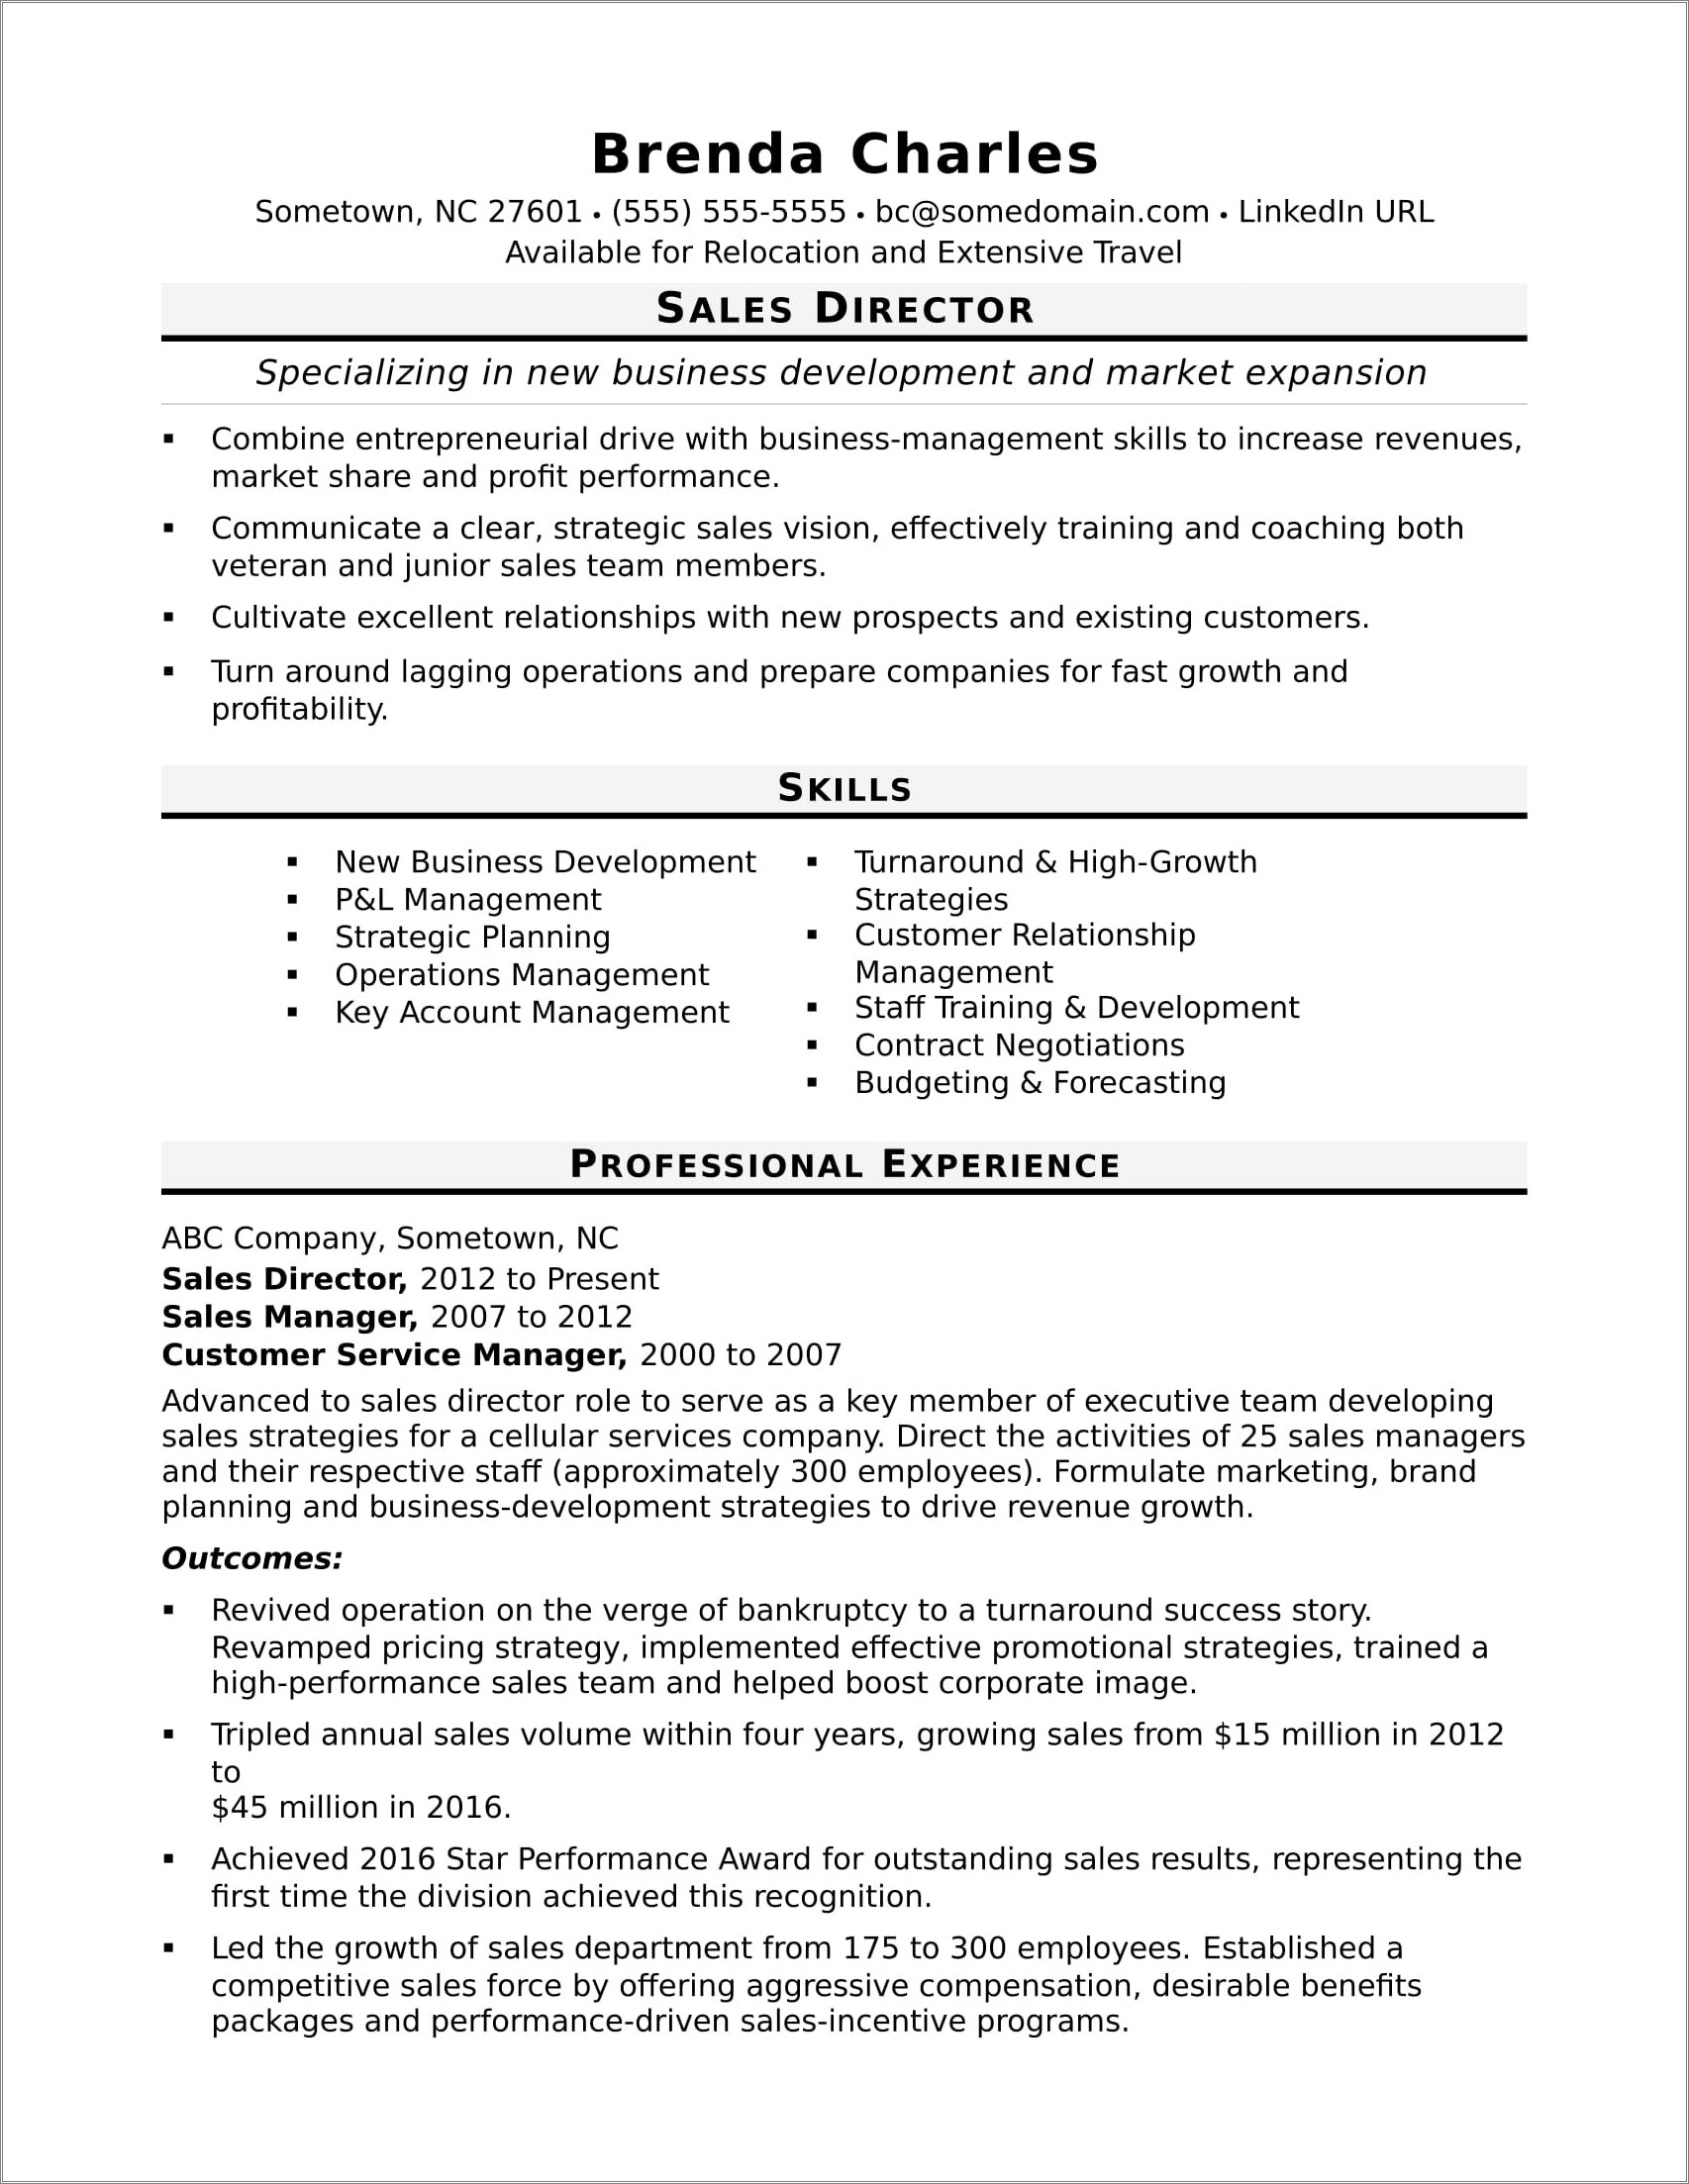 Good As Individual Contributor And Team Member Resume